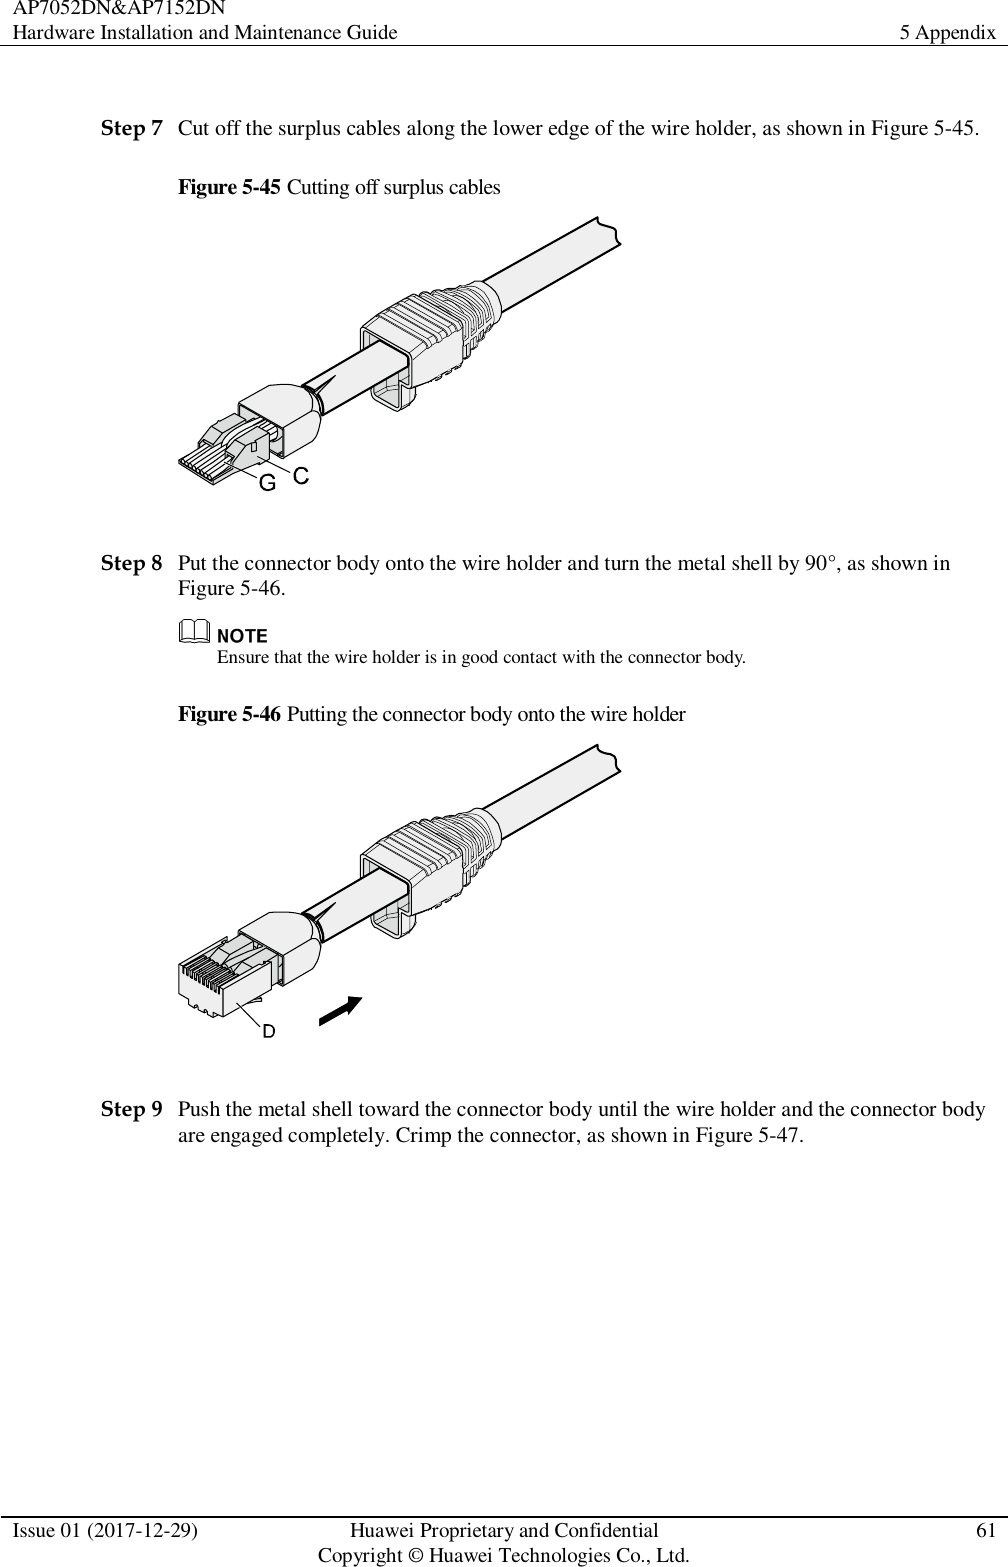 AP7052DN&amp;AP7152DN Hardware Installation and Maintenance Guide 5 Appendix  Issue 01 (2017-12-29) Huawei Proprietary and Confidential                                     Copyright © Huawei Technologies Co., Ltd. 61   Step 7 Cut off the surplus cables along the lower edge of the wire holder, as shown in Figure 5-45. Figure 5-45 Cutting off surplus cables   Step 8 Put the connector body onto the wire holder and turn the metal shell by 90°, as shown in Figure 5-46.  Ensure that the wire holder is in good contact with the connector body. Figure 5-46 Putting the connector body onto the wire holder   Step 9 Push the metal shell toward the connector body until the wire holder and the connector body are engaged completely. Crimp the connector, as shown in Figure 5-47. 